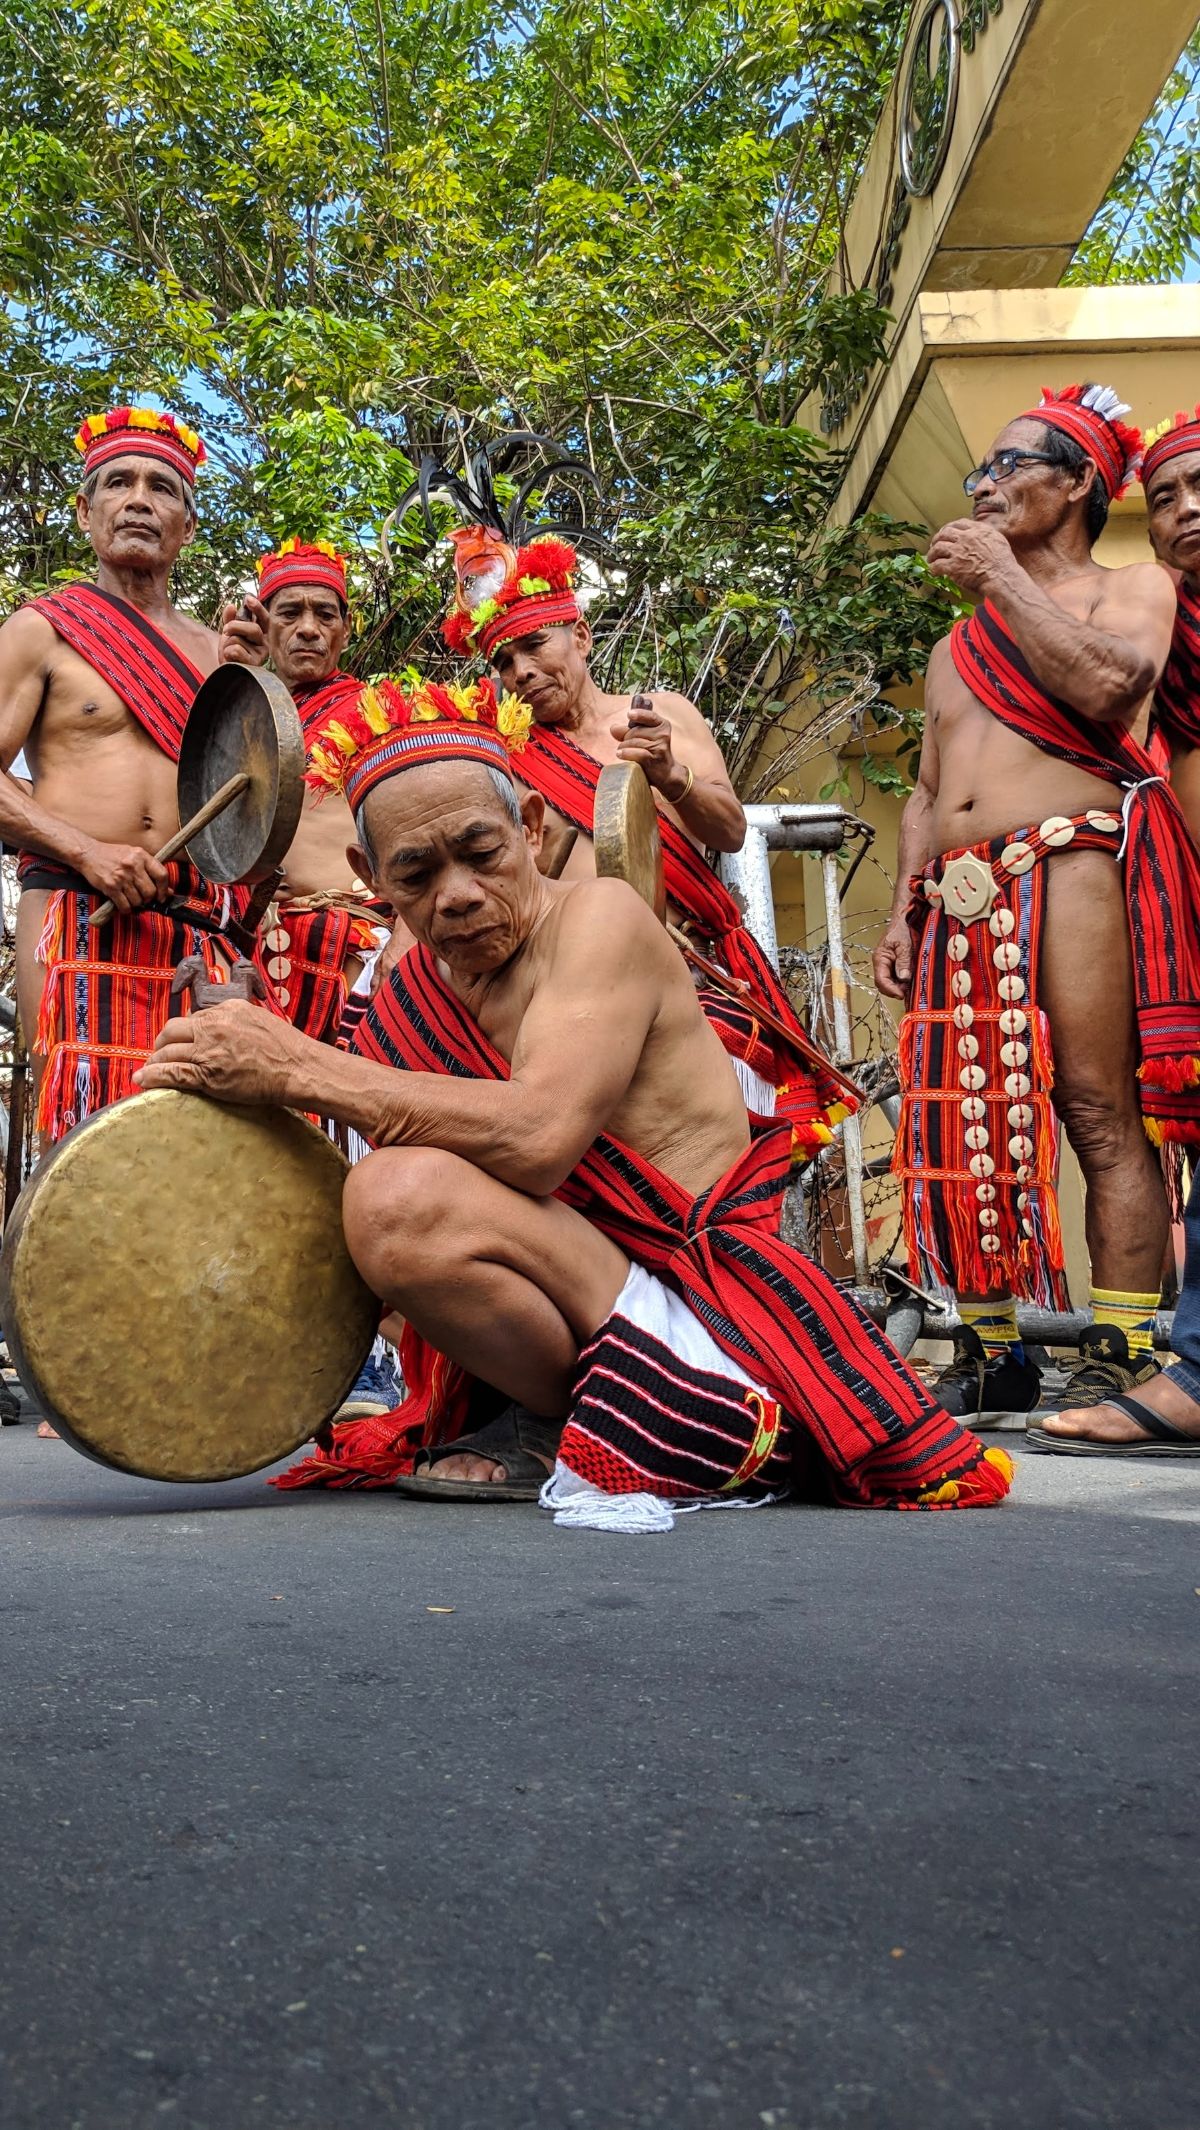 5 Amazing Philippines Traditions You Need to Know Before Visiting